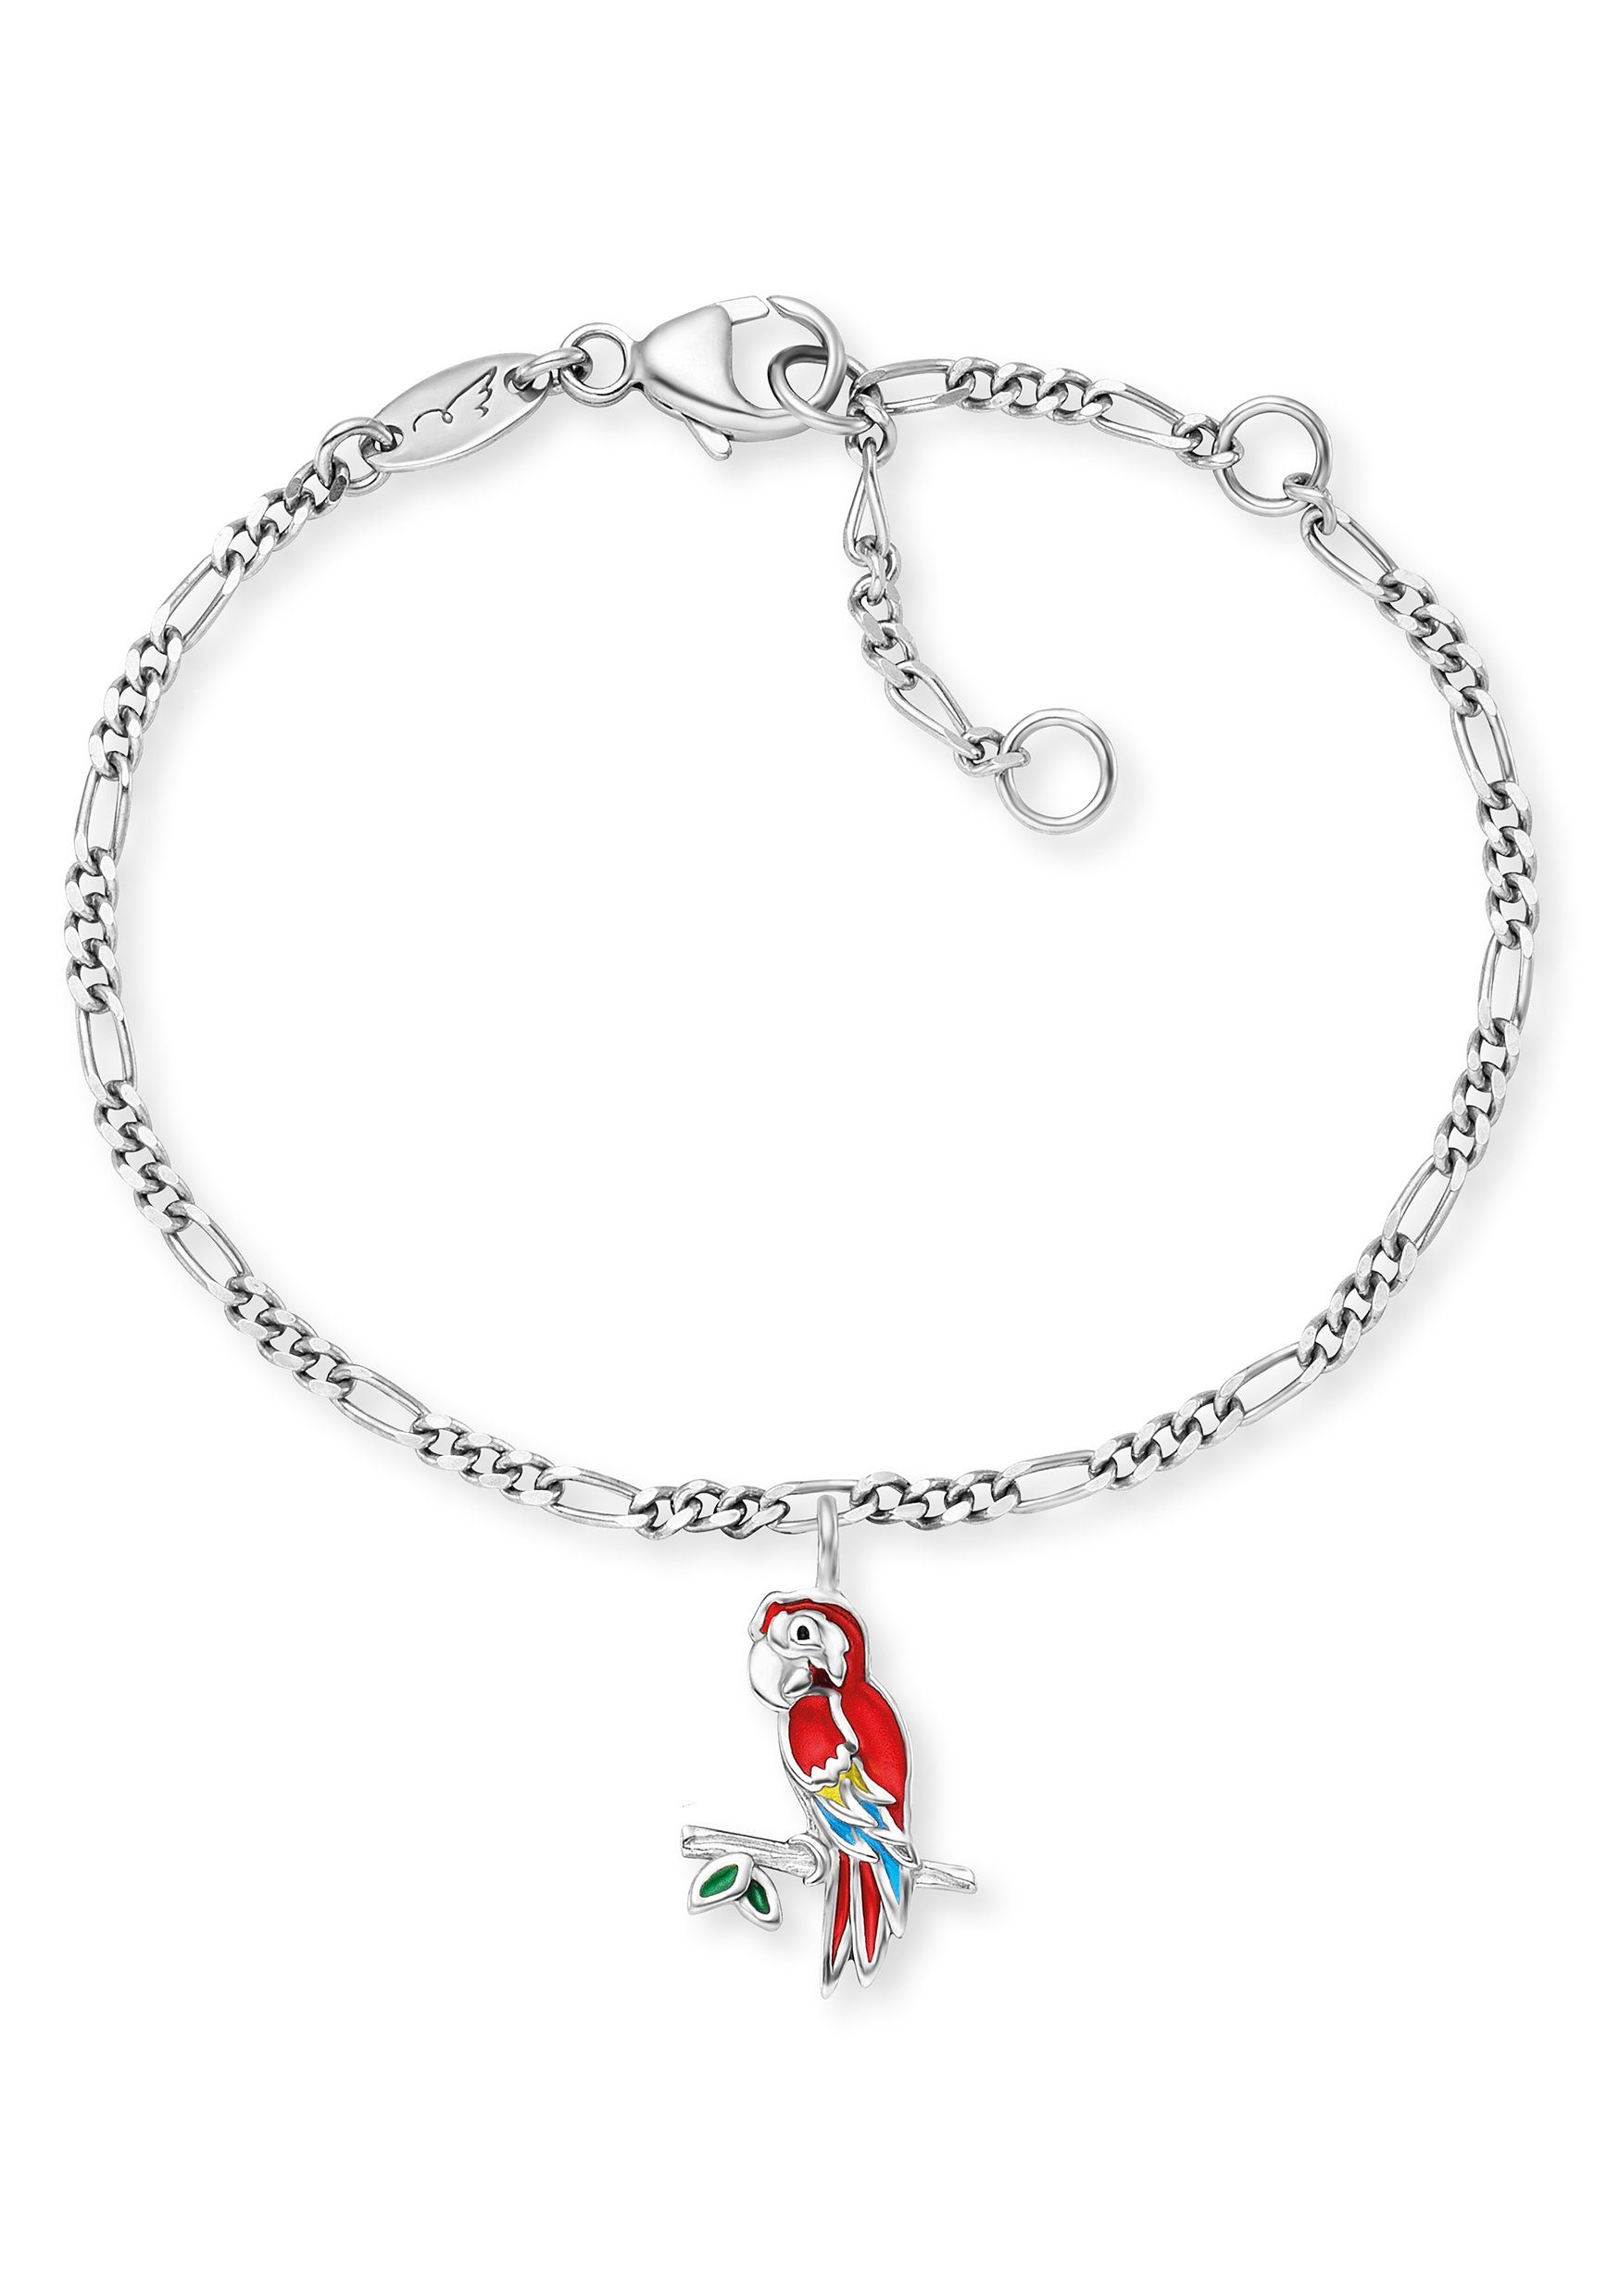 Niedrige Preise Herzengel Armband Papagei, HEB-PARROT, Emaille mit